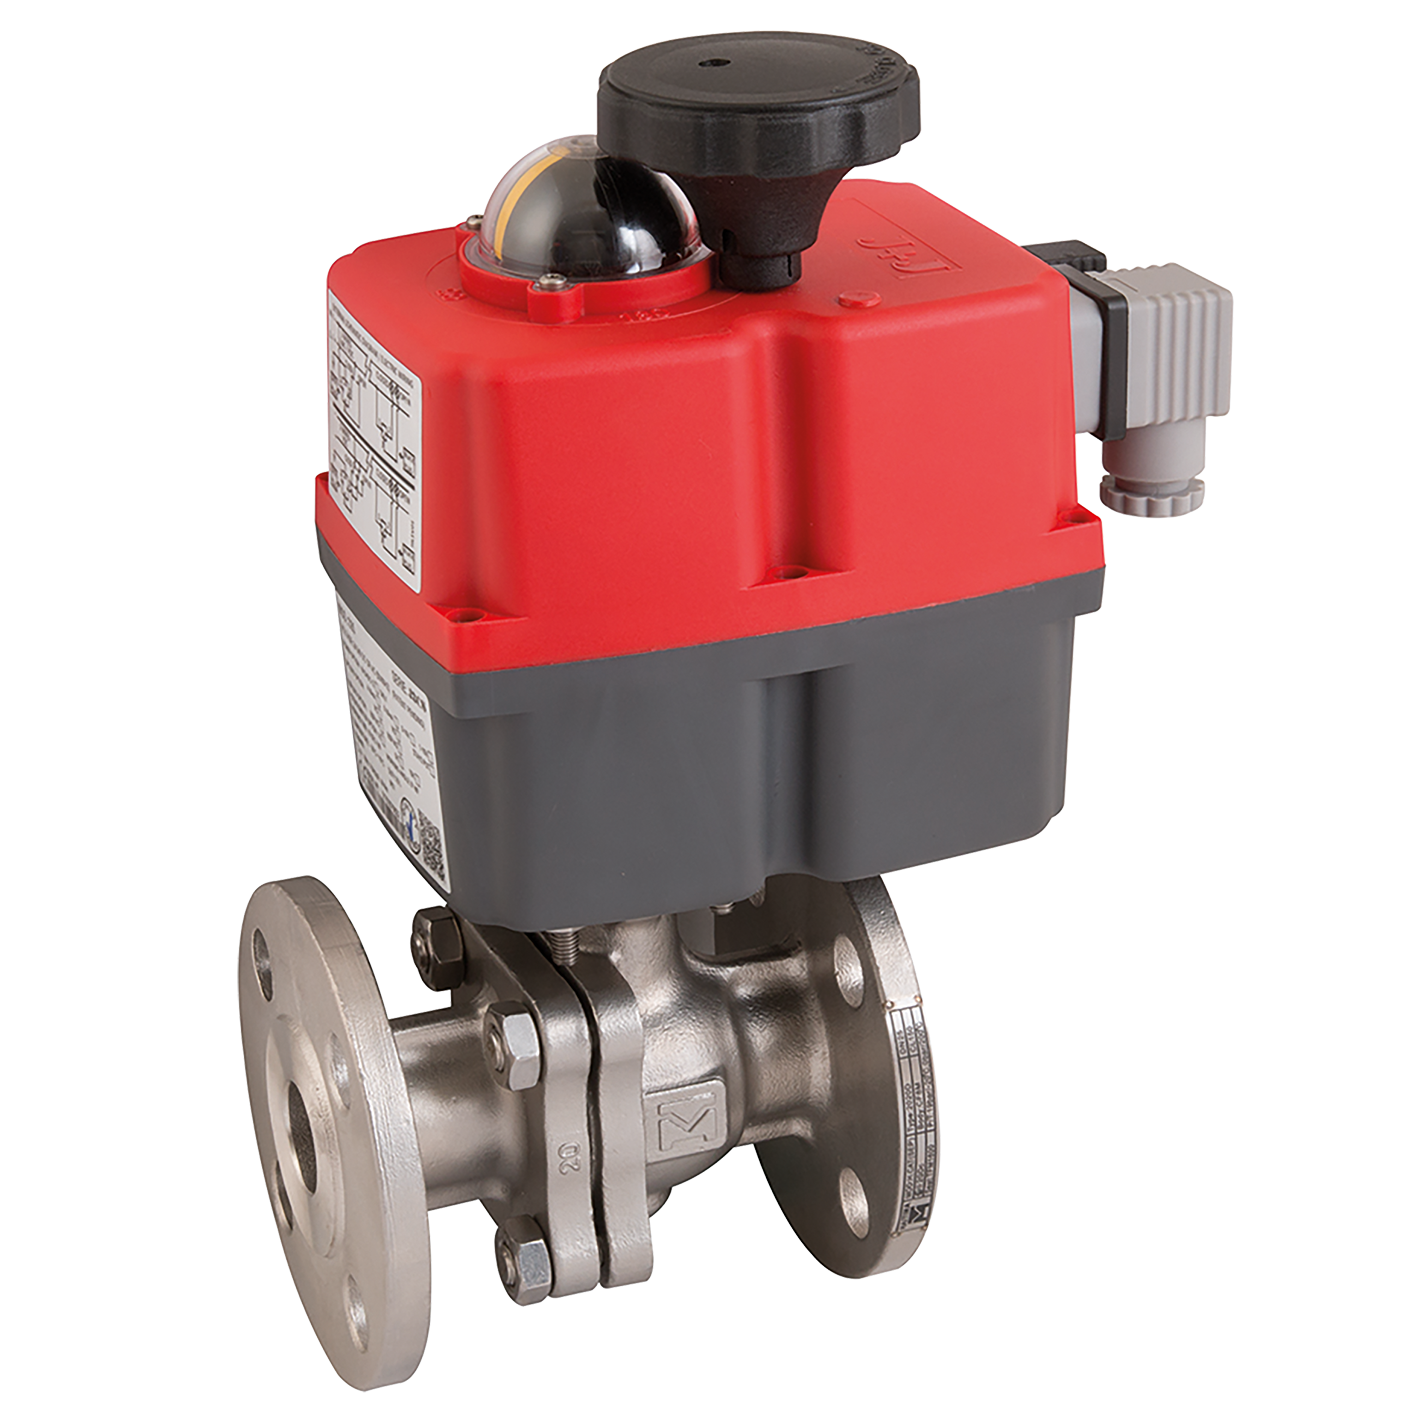 Suppliers of Electric Actuated Stainless Steel Valve UK